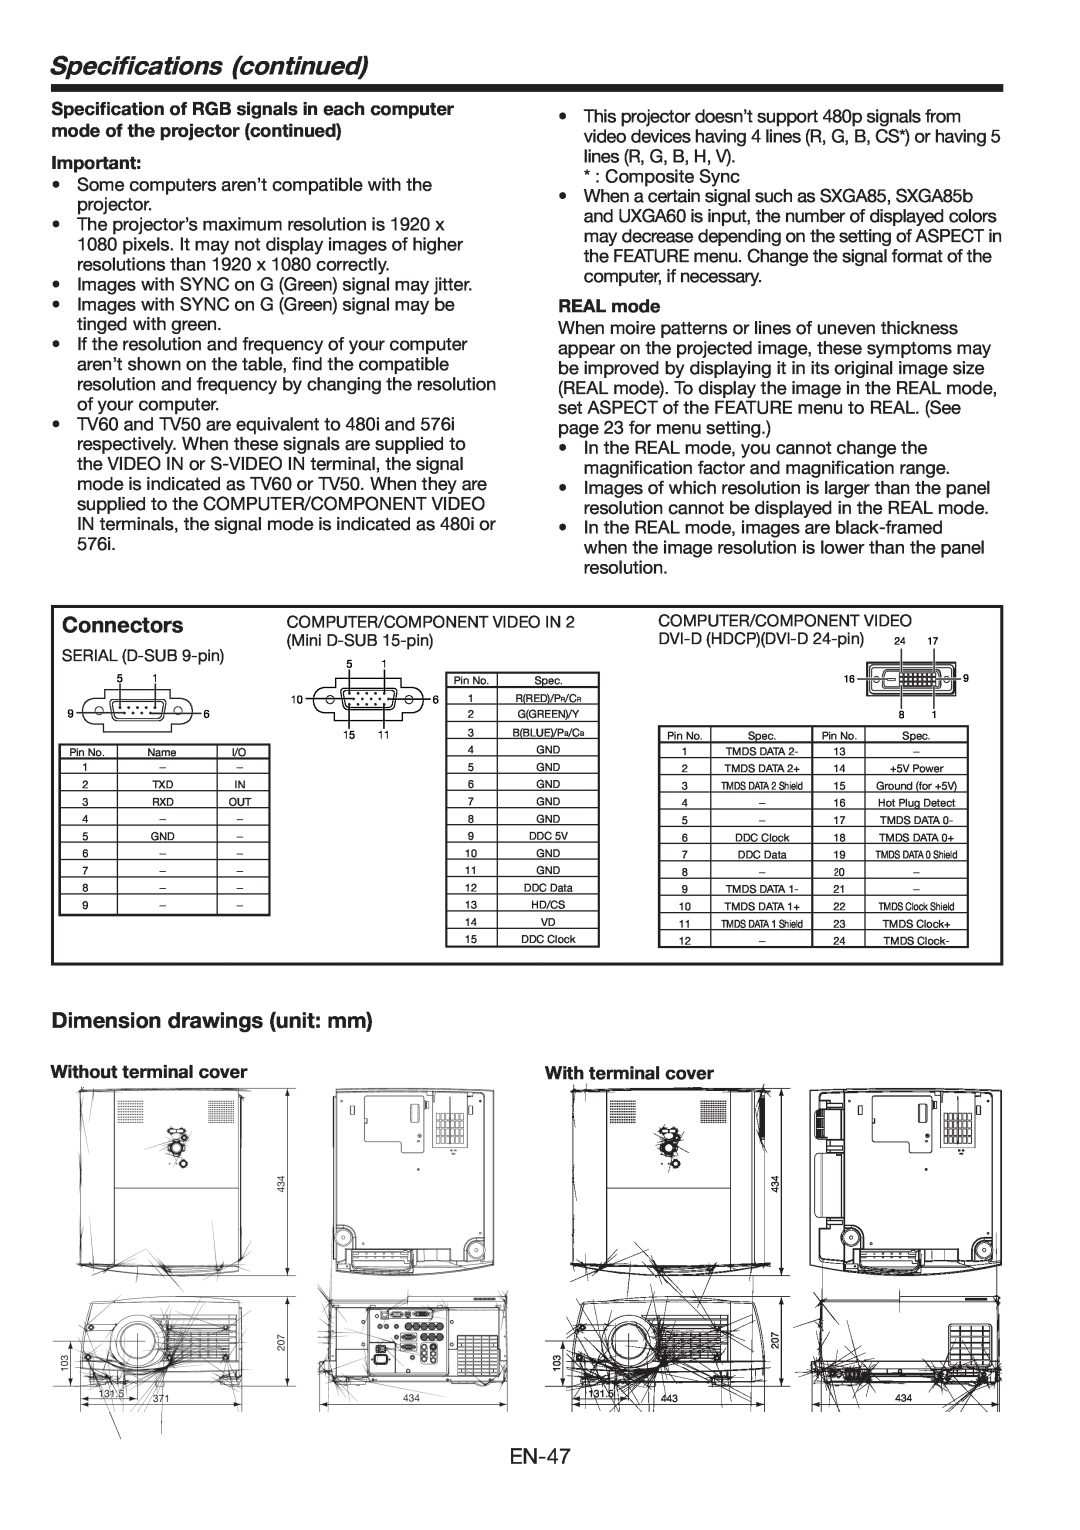 Mitsubishi Electronics FL6900U user manual Connectors, Dimension drawings unit mm, Speciﬁcations continued, REAL mode 